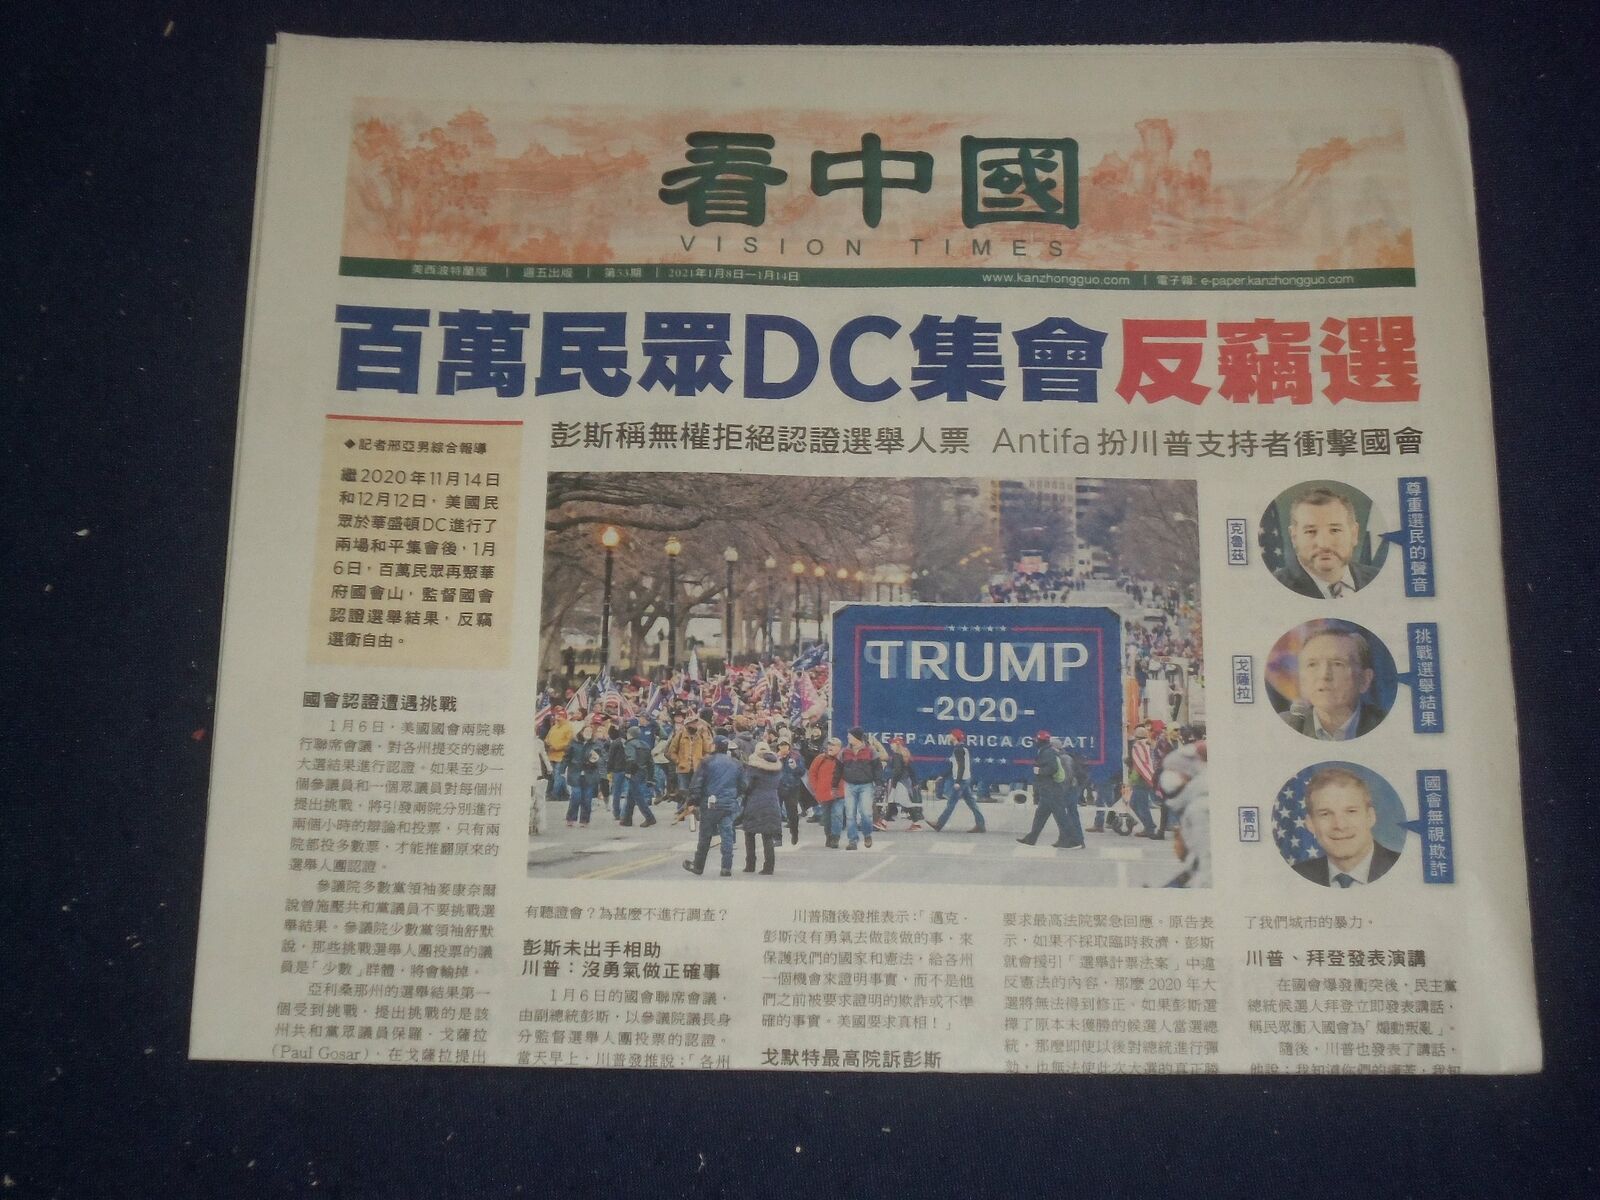 2021 JAN 8-14 VISION TIMES NEWSPAPER - CHINESE - MILLIONS RALLY IN D.C. -NP 5087